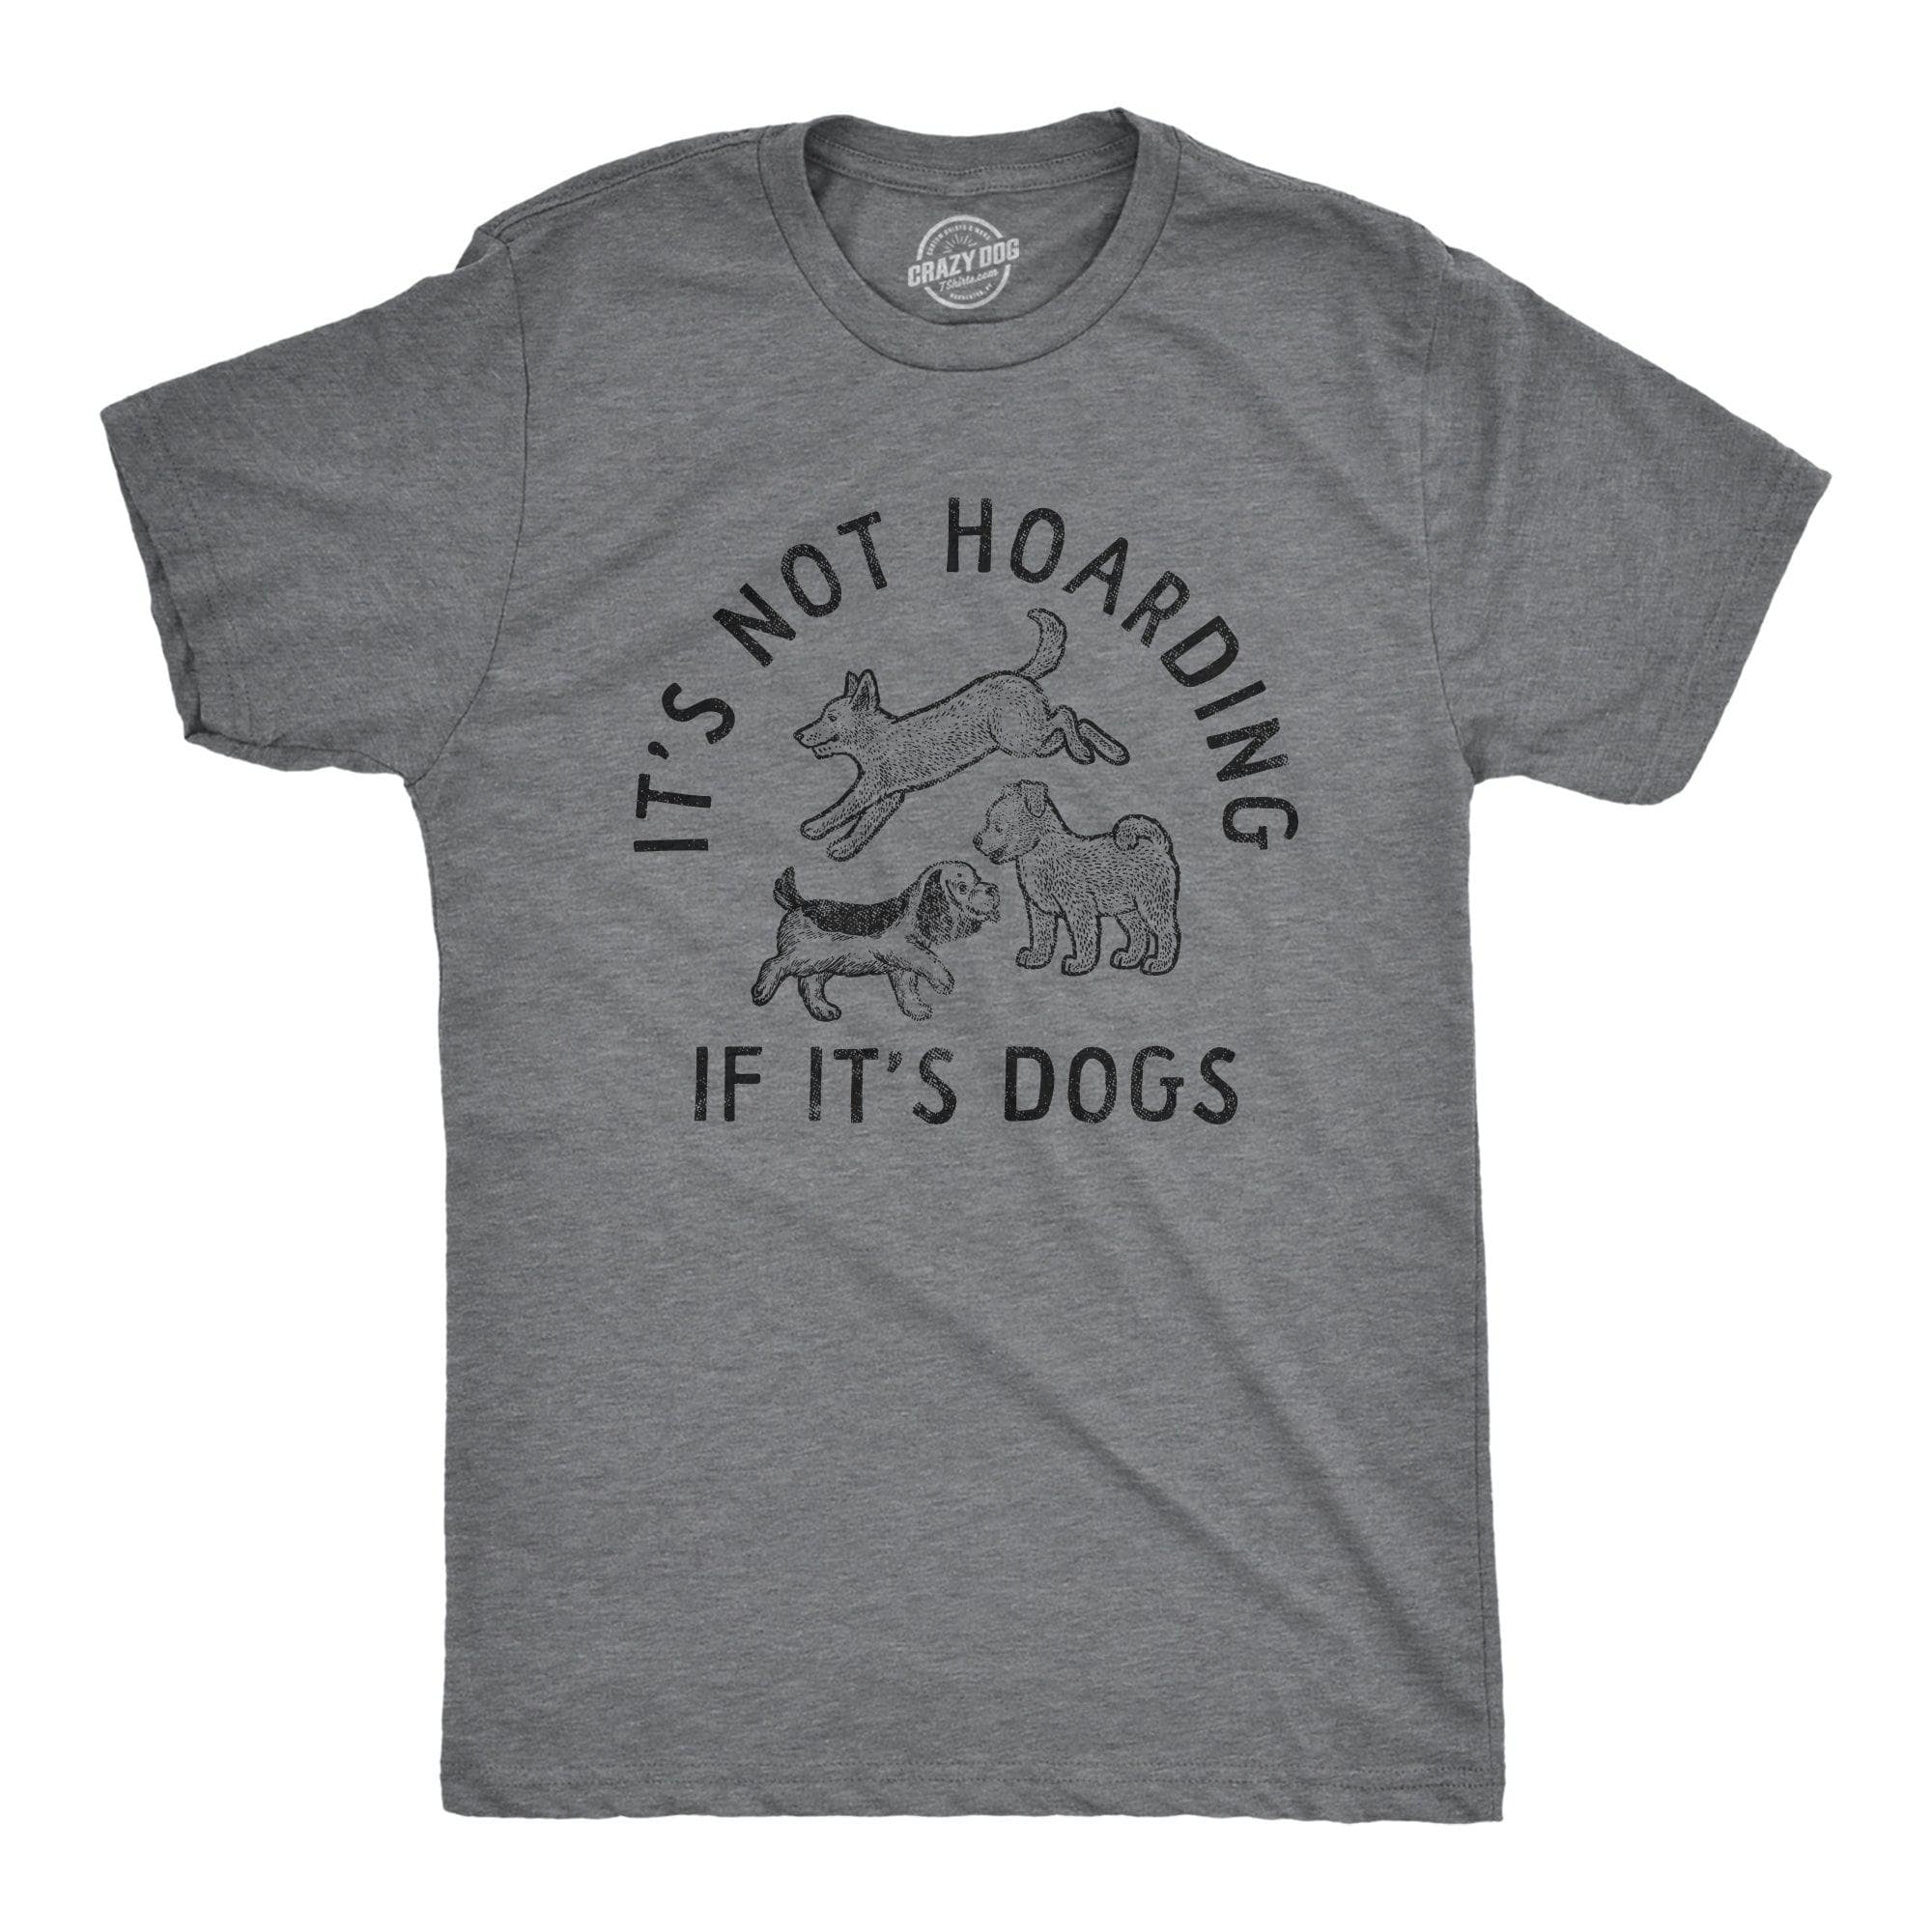 Its Not Hoarding If Its Dogs Men's Tshirt  -  Crazy Dog T-Shirts